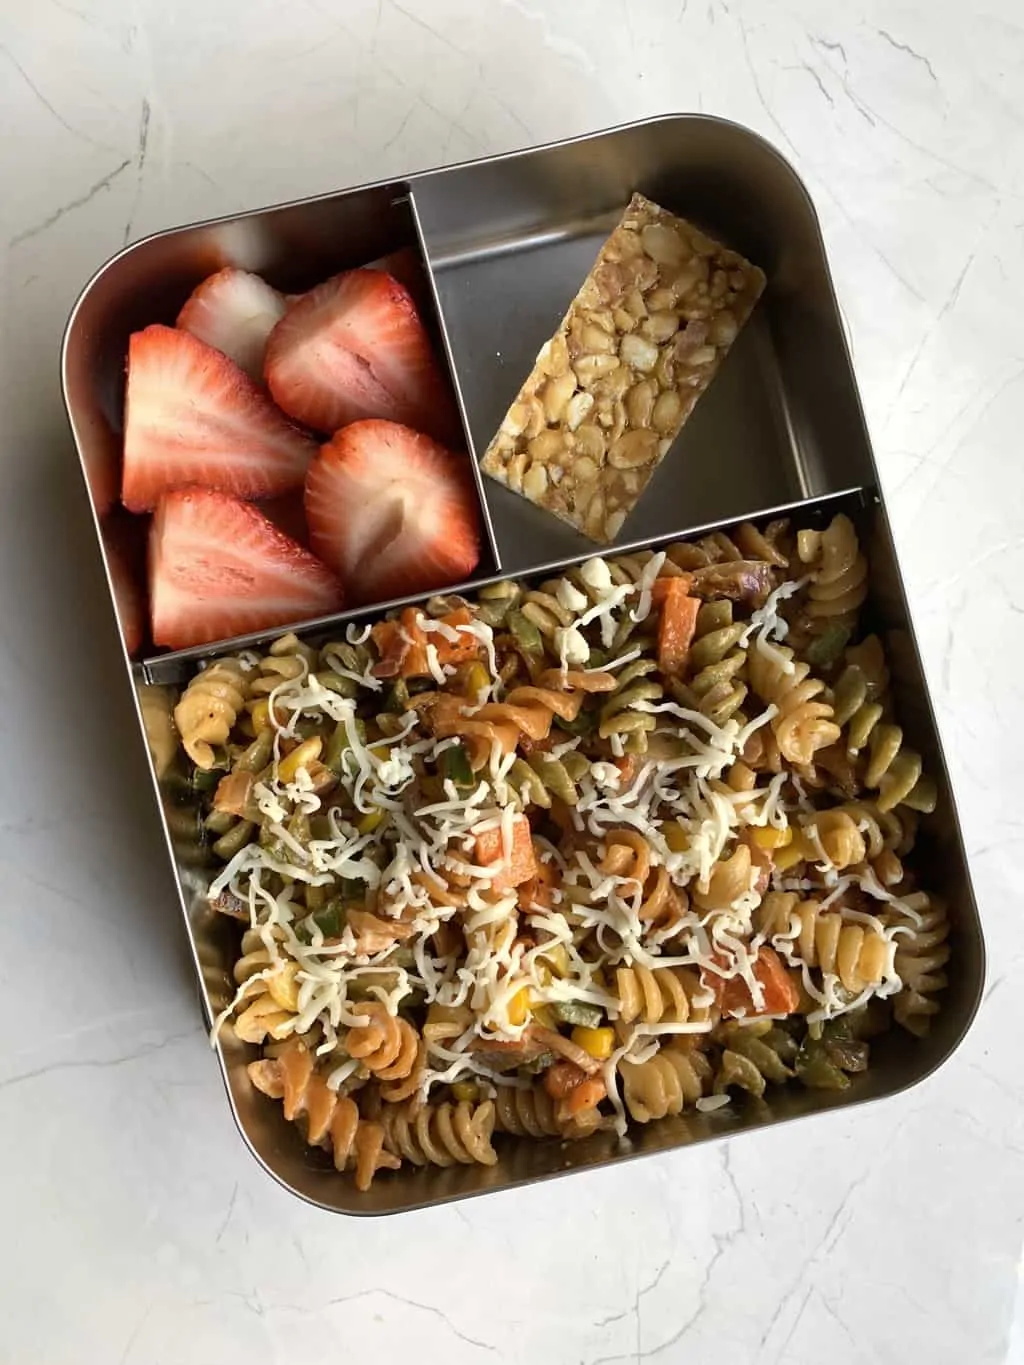 Healthy School Lunch Recipes that your kids will actually love! These recipes are filled with wholesome ingredients, packed with nutrients and will keep your kids satisfied all afternoon.